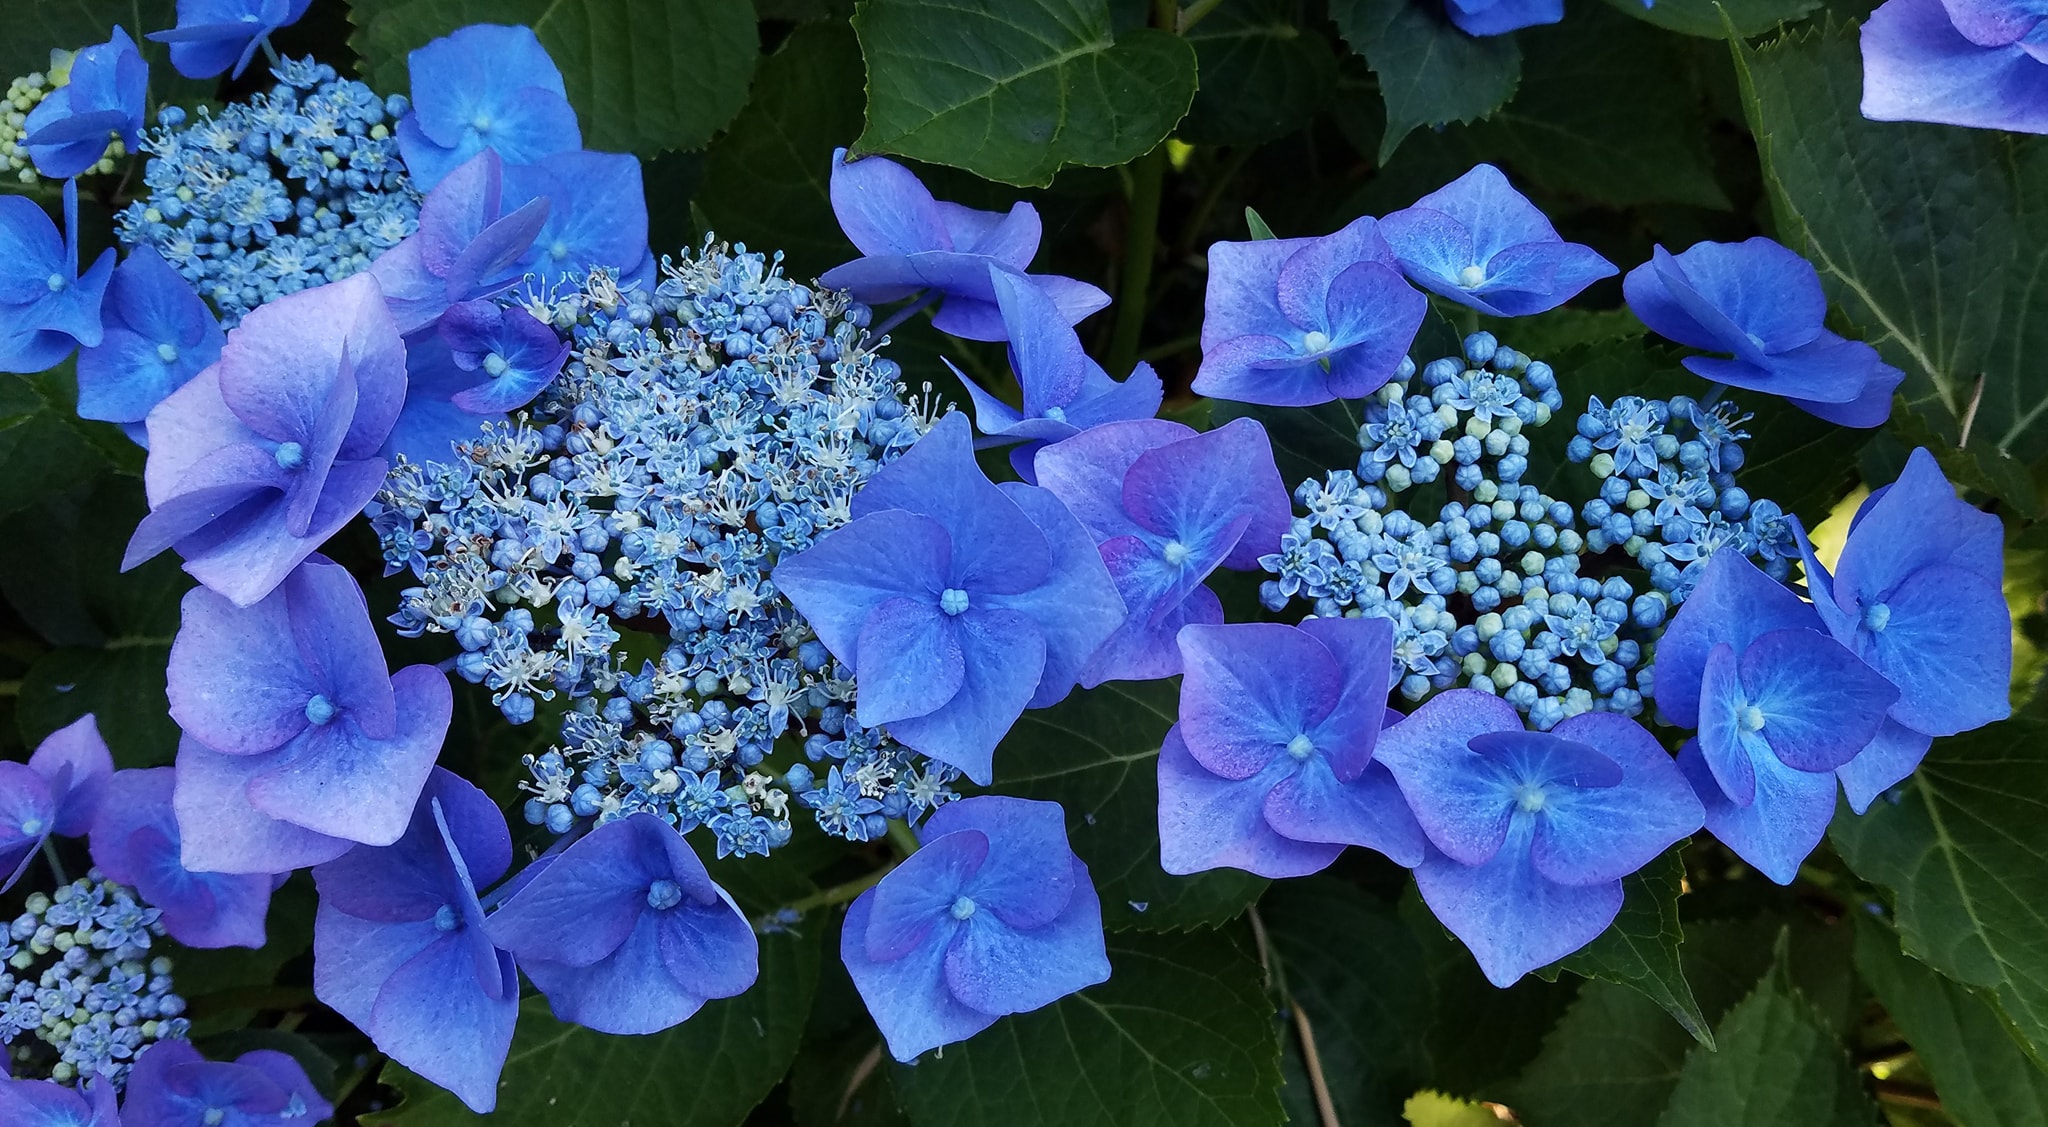 Are you supposed to cut back hydrangeas?